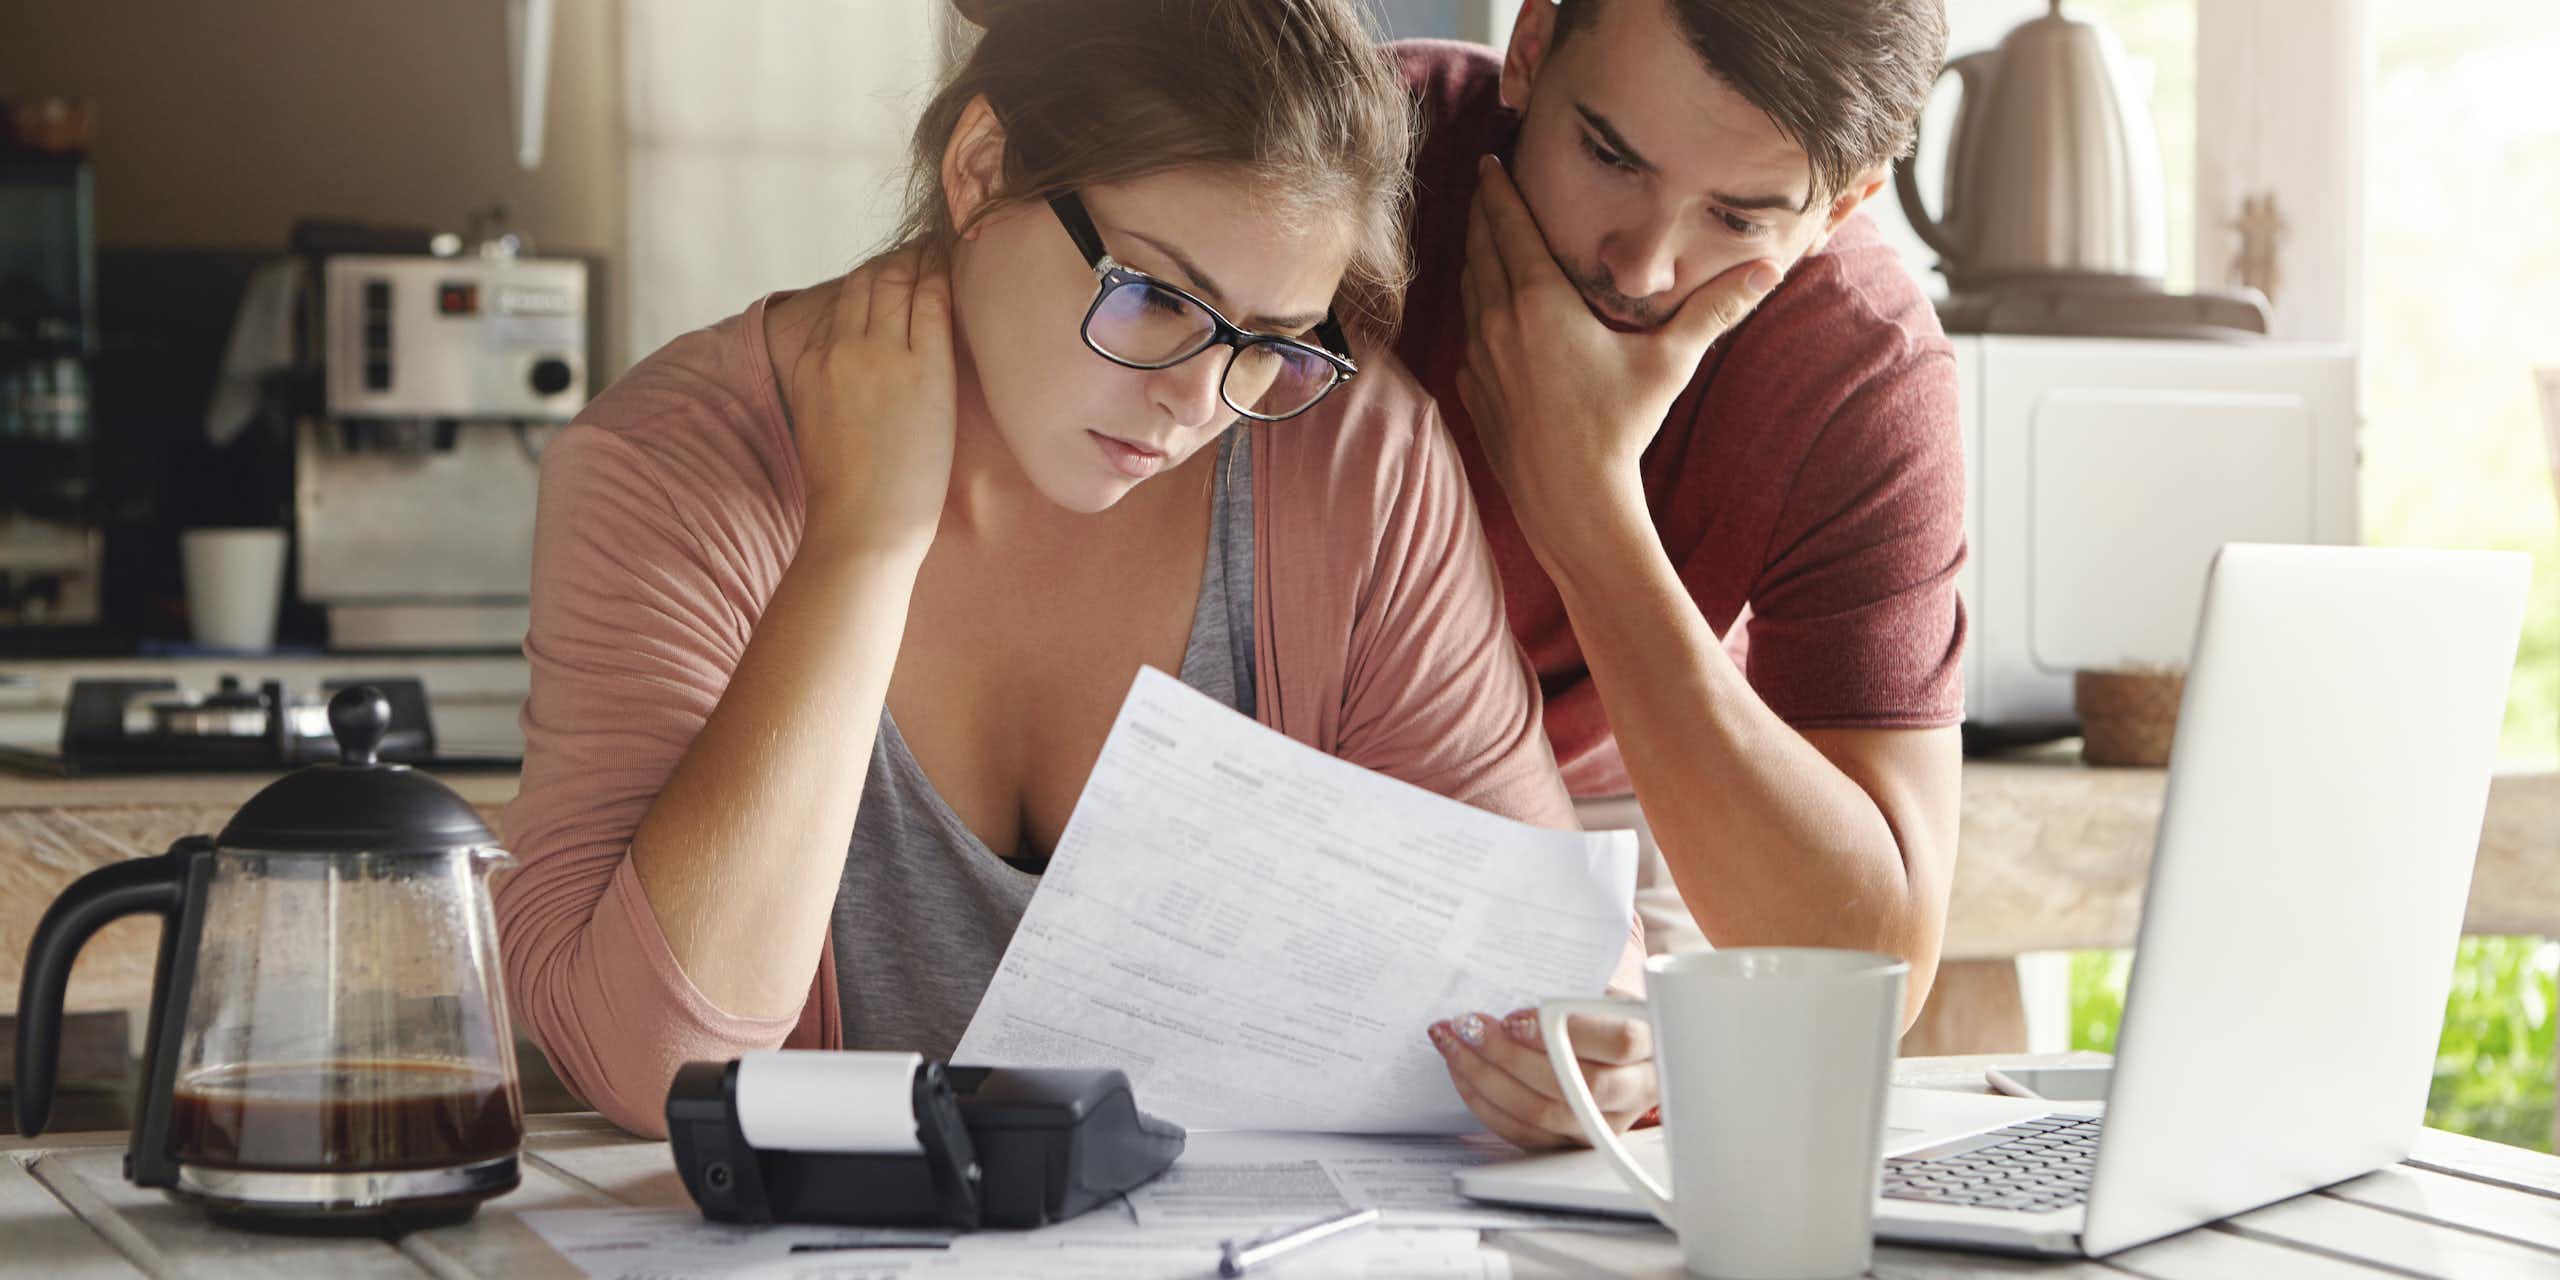 A young couple, looking confused, pores over financial papers at the kitchen counter, looking at a laptop computer